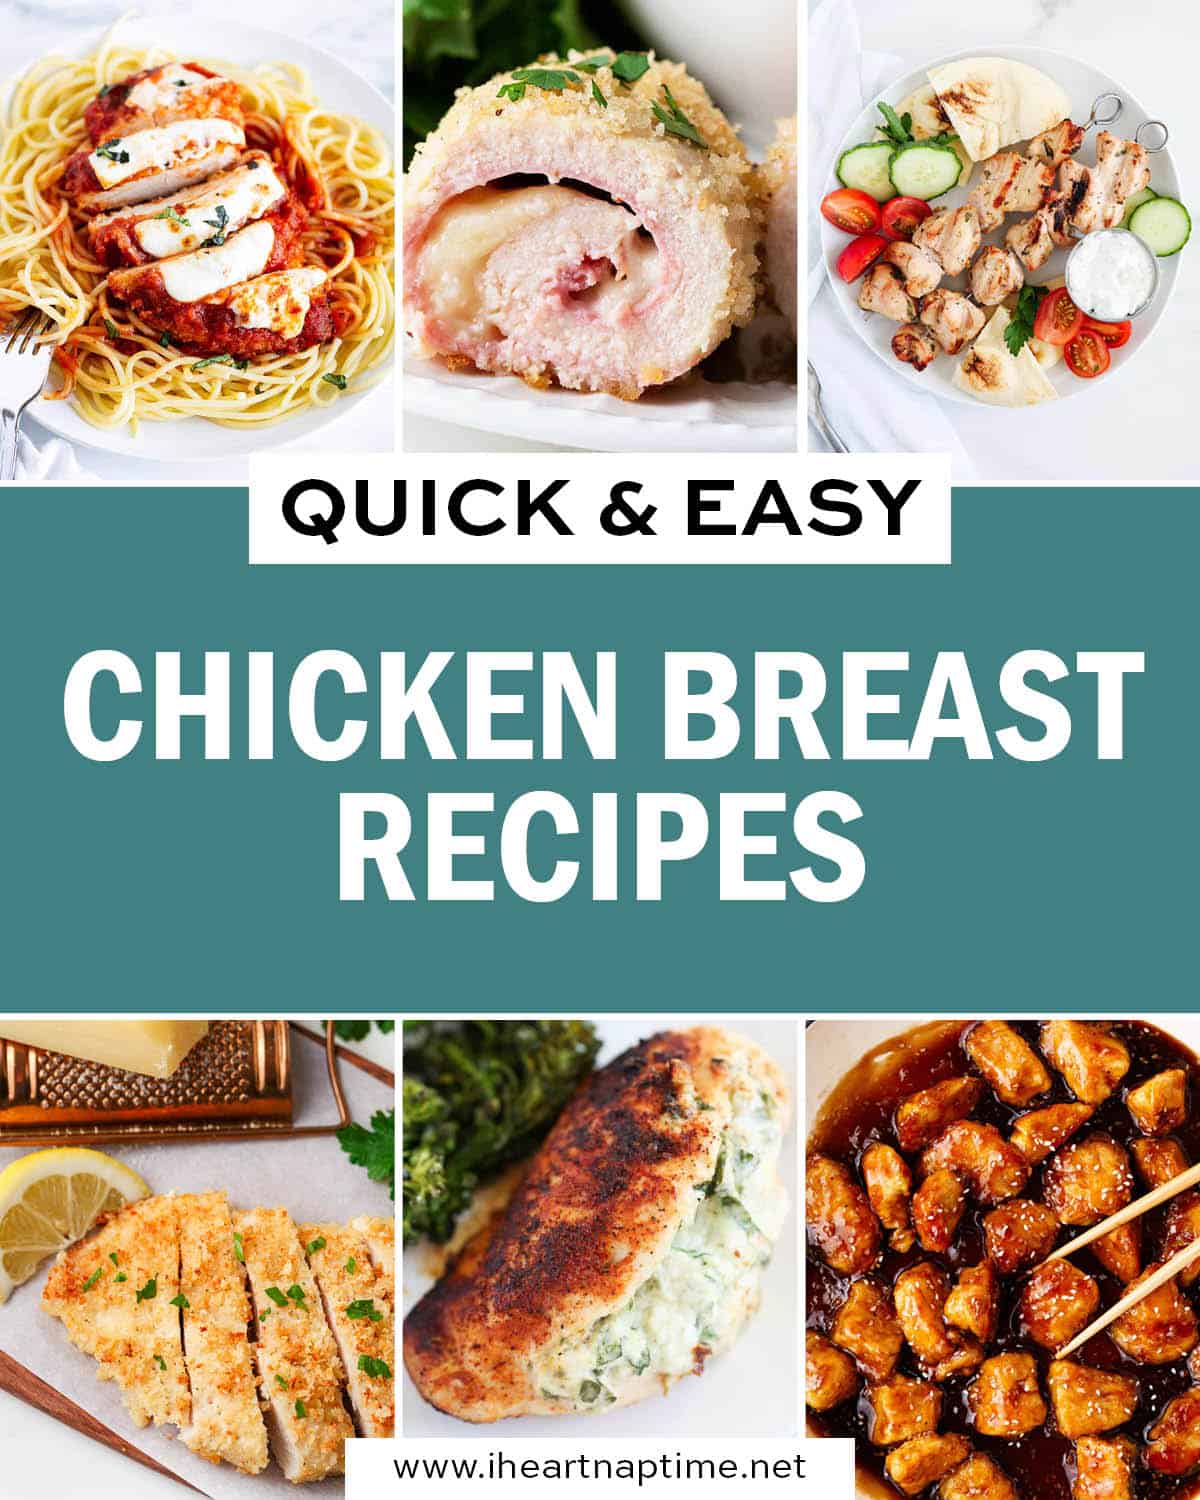 A collage of photos with quick and easy chicken breast recipes.